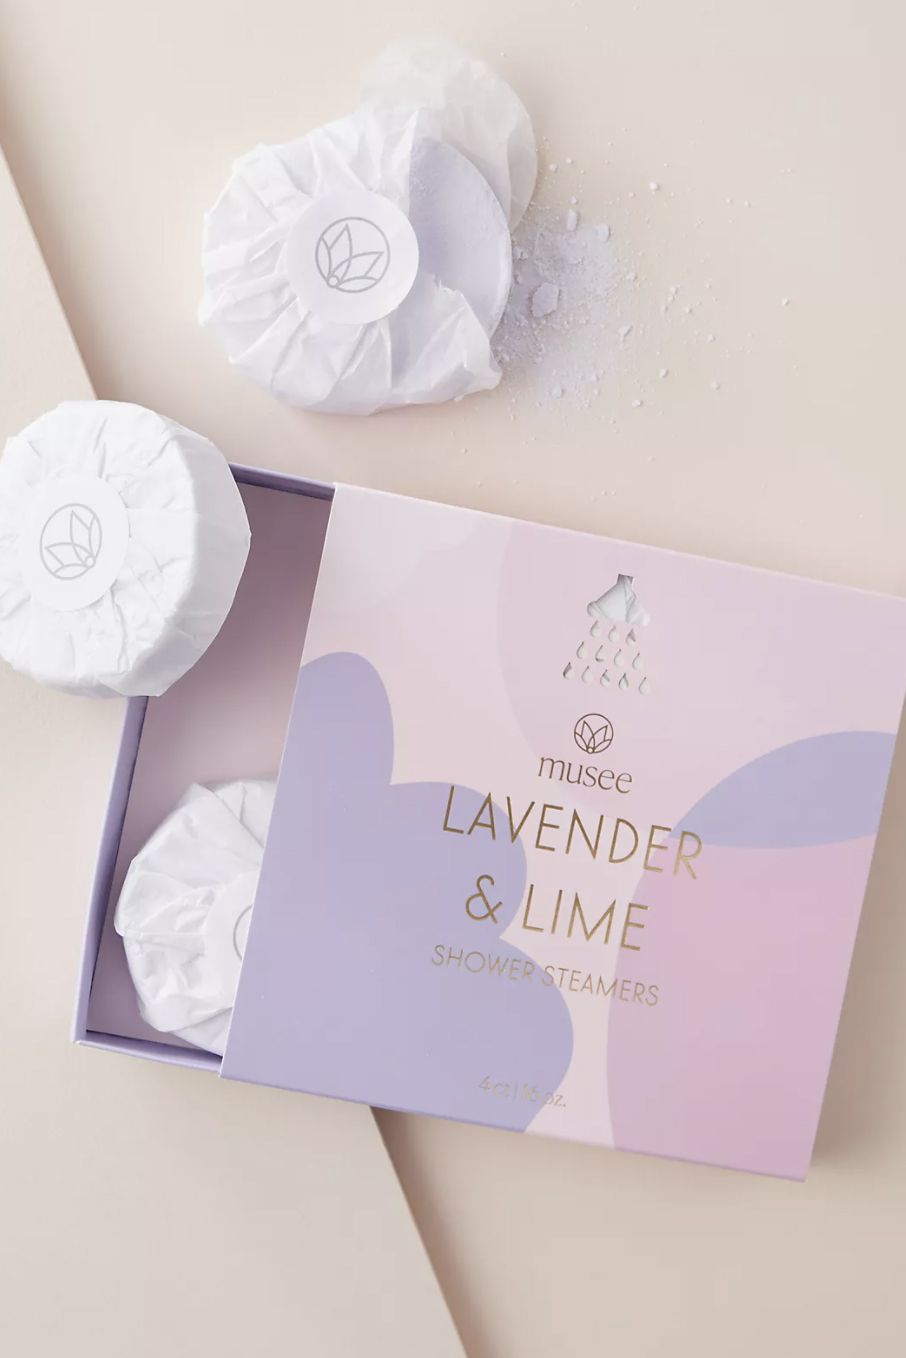 <p>BUY IT: $24; anthropologie.com</p>
                            <p>Think of these steamers as a bath bomb for the shower. They're available in three scents: Water Lily &amp; Linen, Eucalyptus &amp; Mint, and Lavender &amp; Lime. </p>
                            